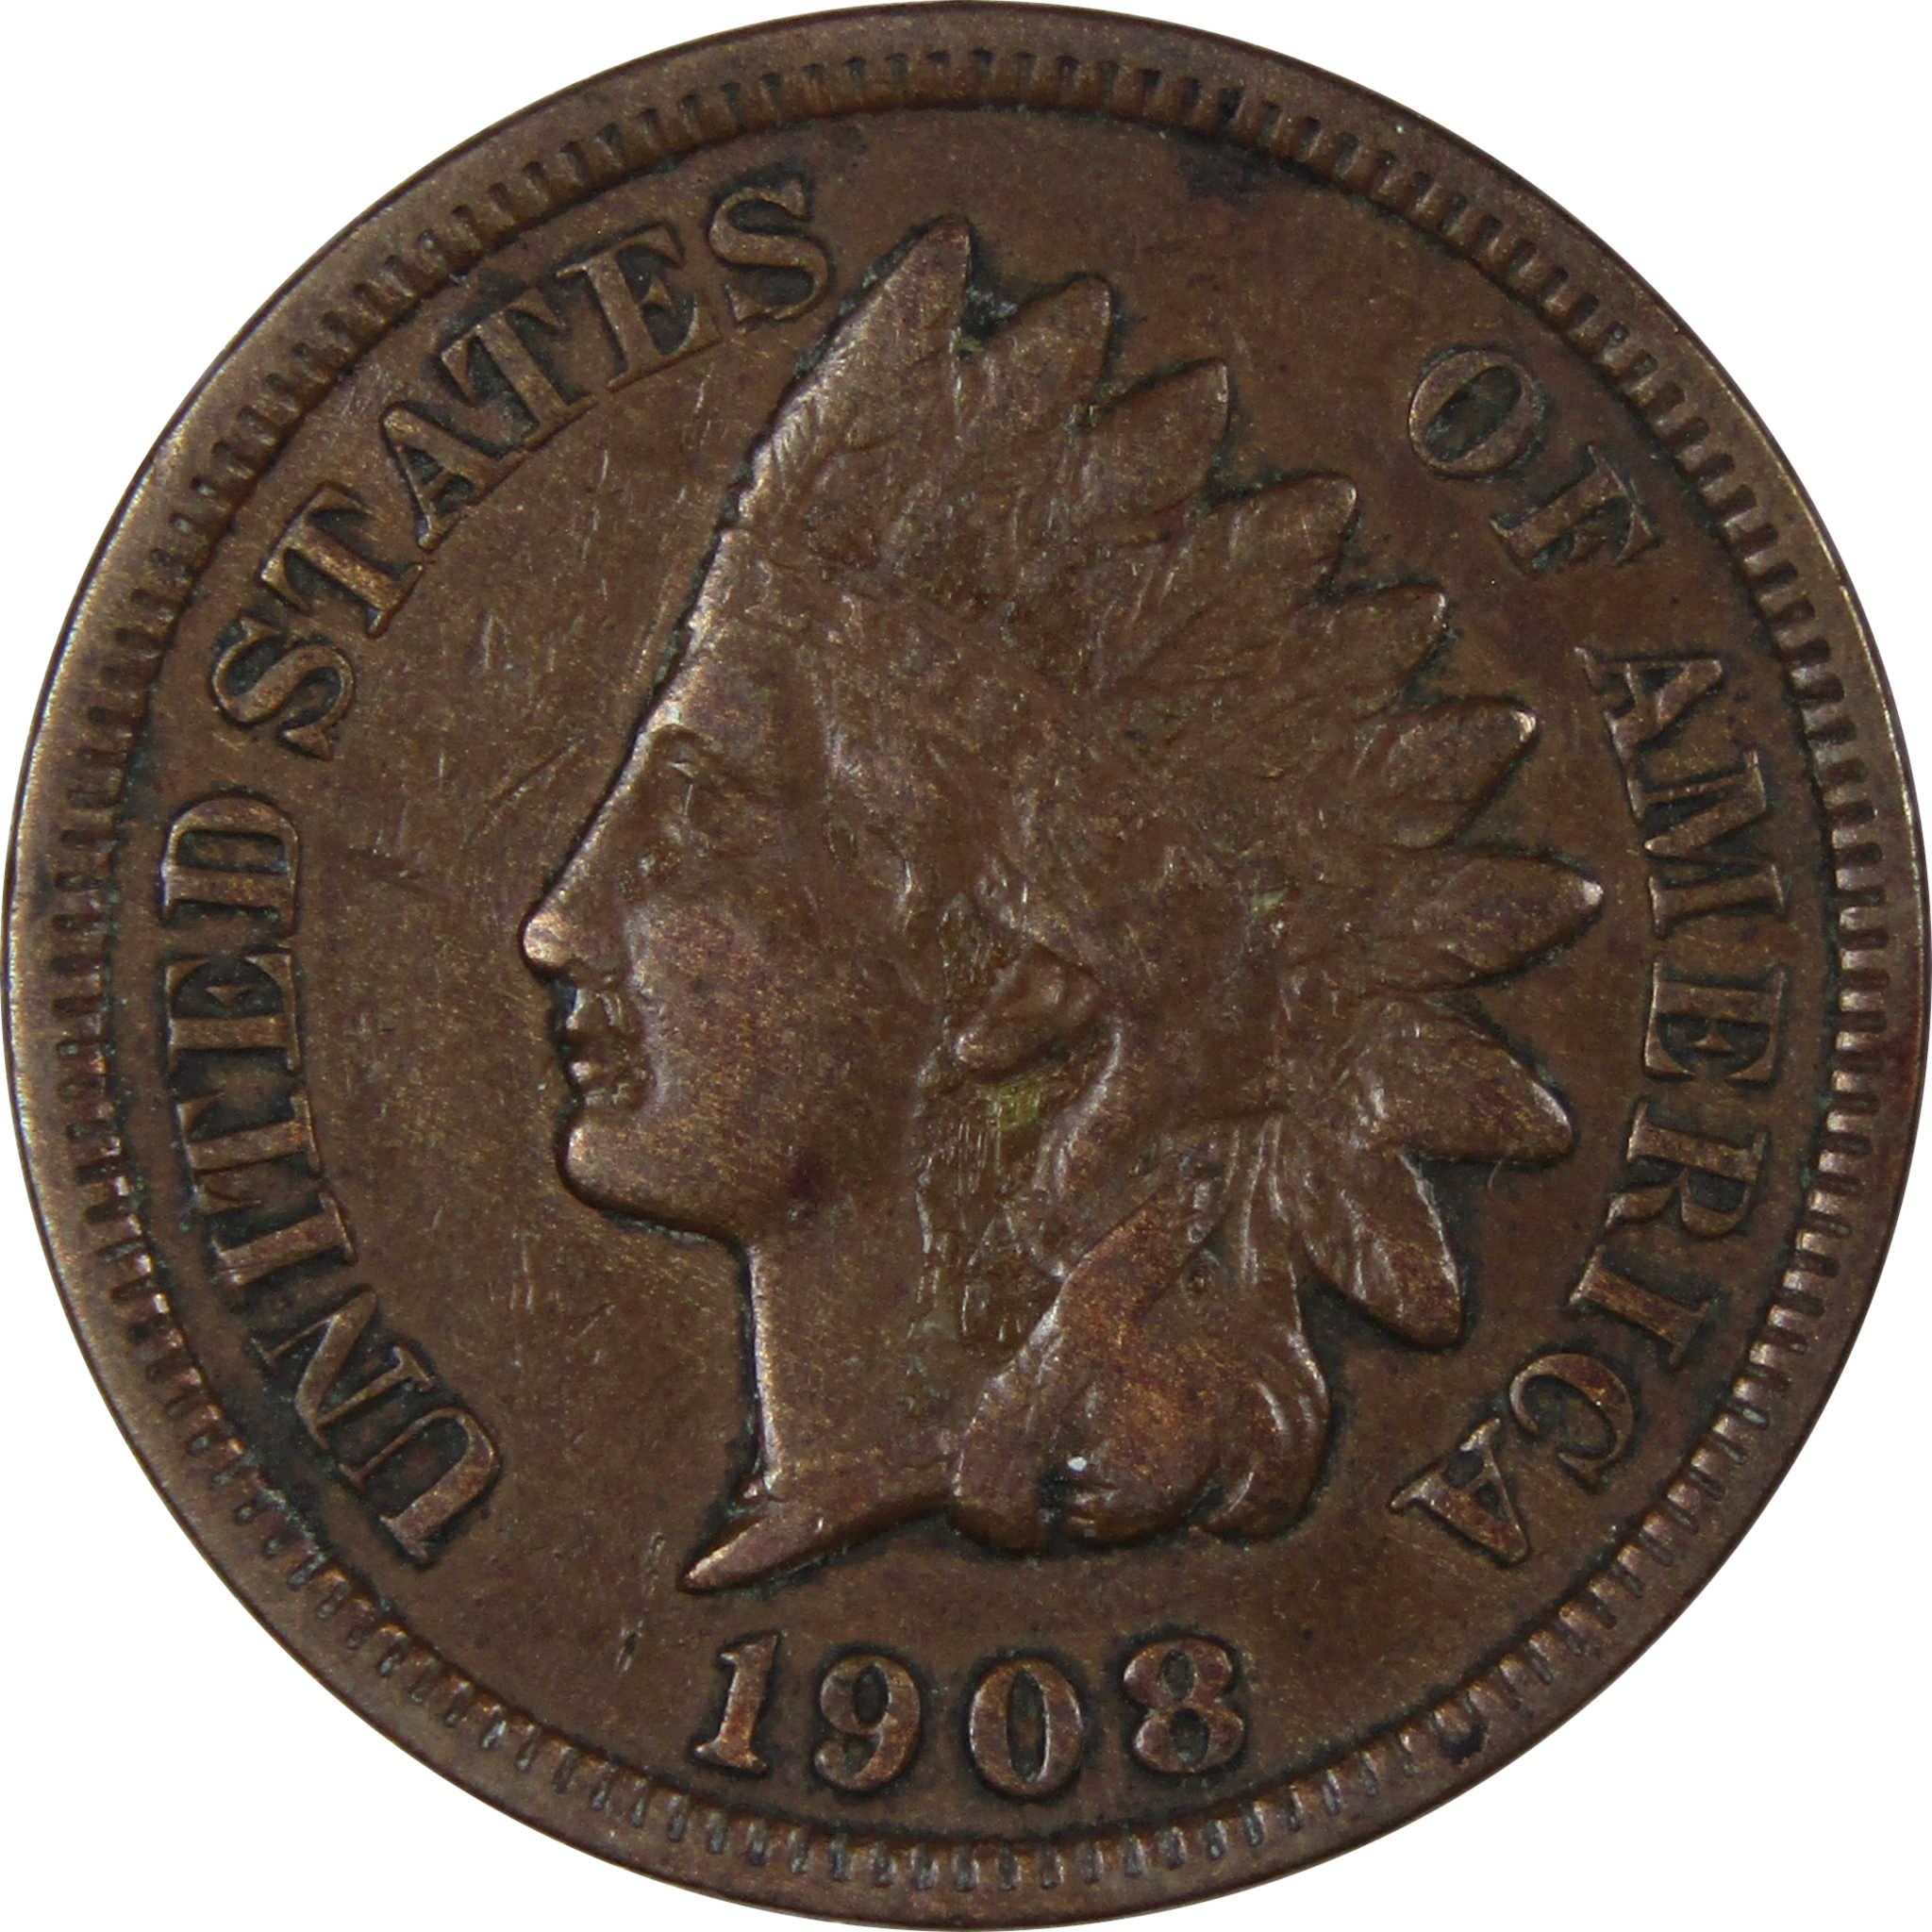 1908 S Indian Head Cent VF Very Fine Penny 1c US Coin SKU:IPC8230